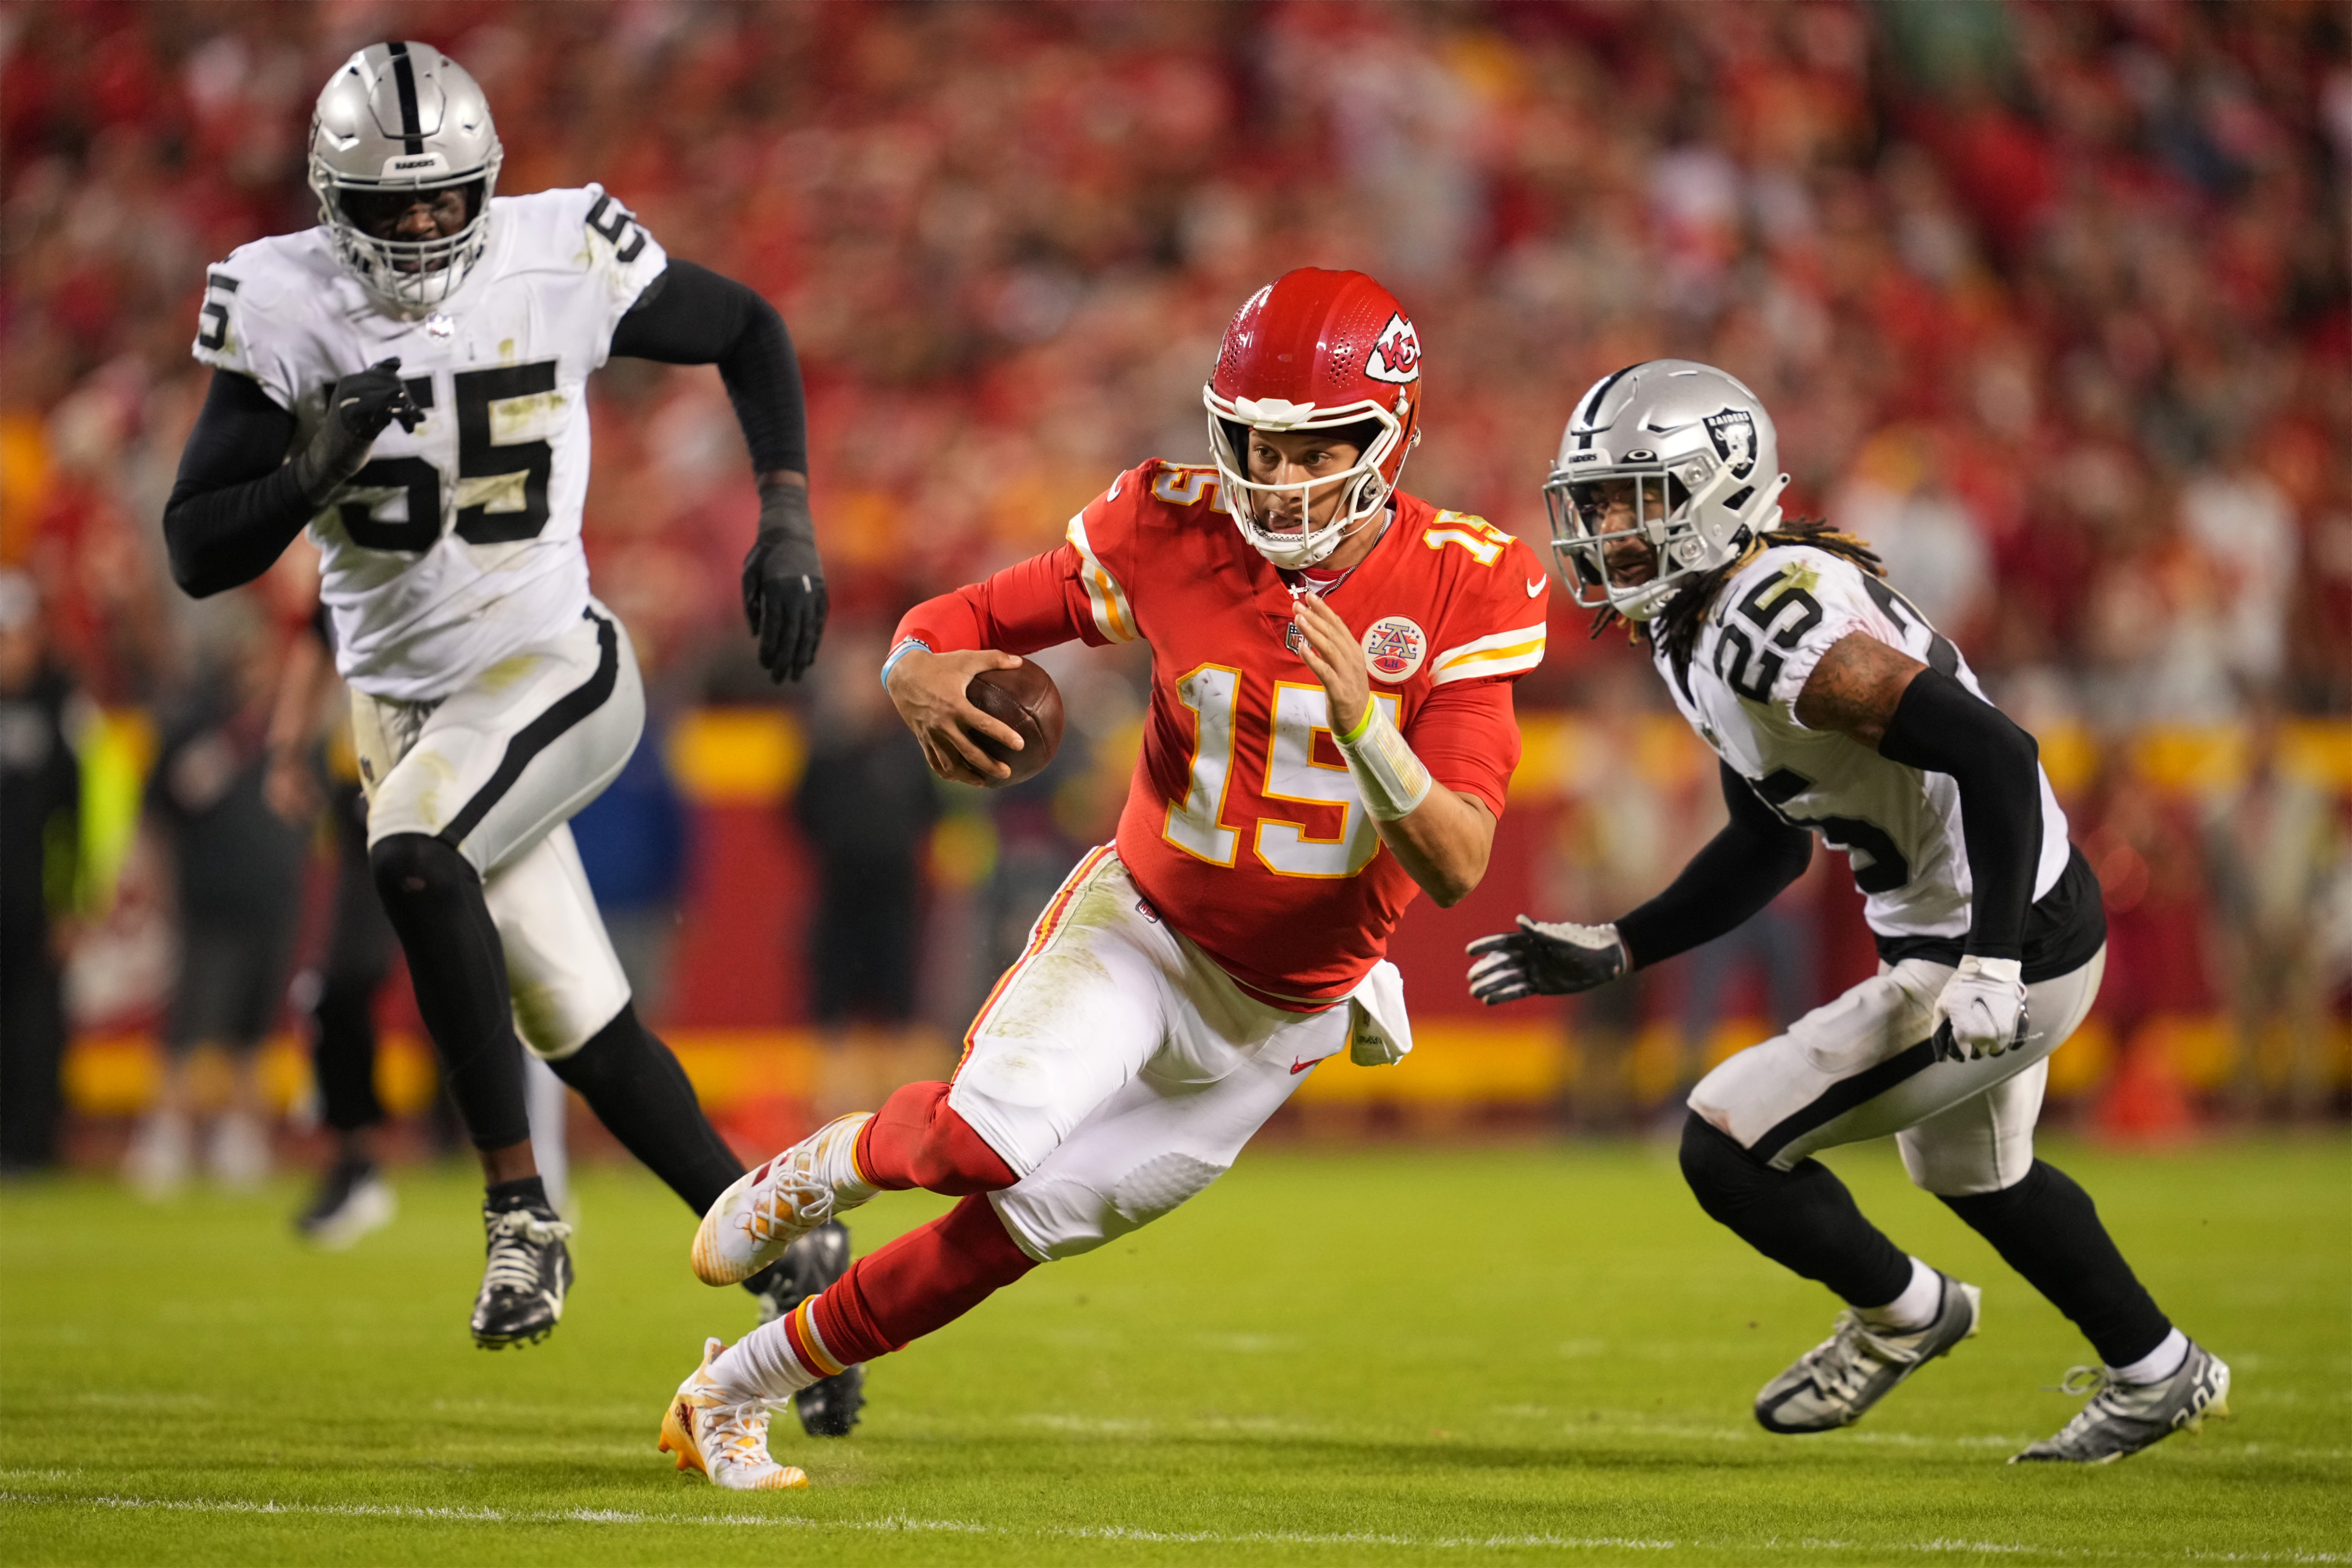 Chiefs vs. Raiders Week 13: How to watch, stream and listen